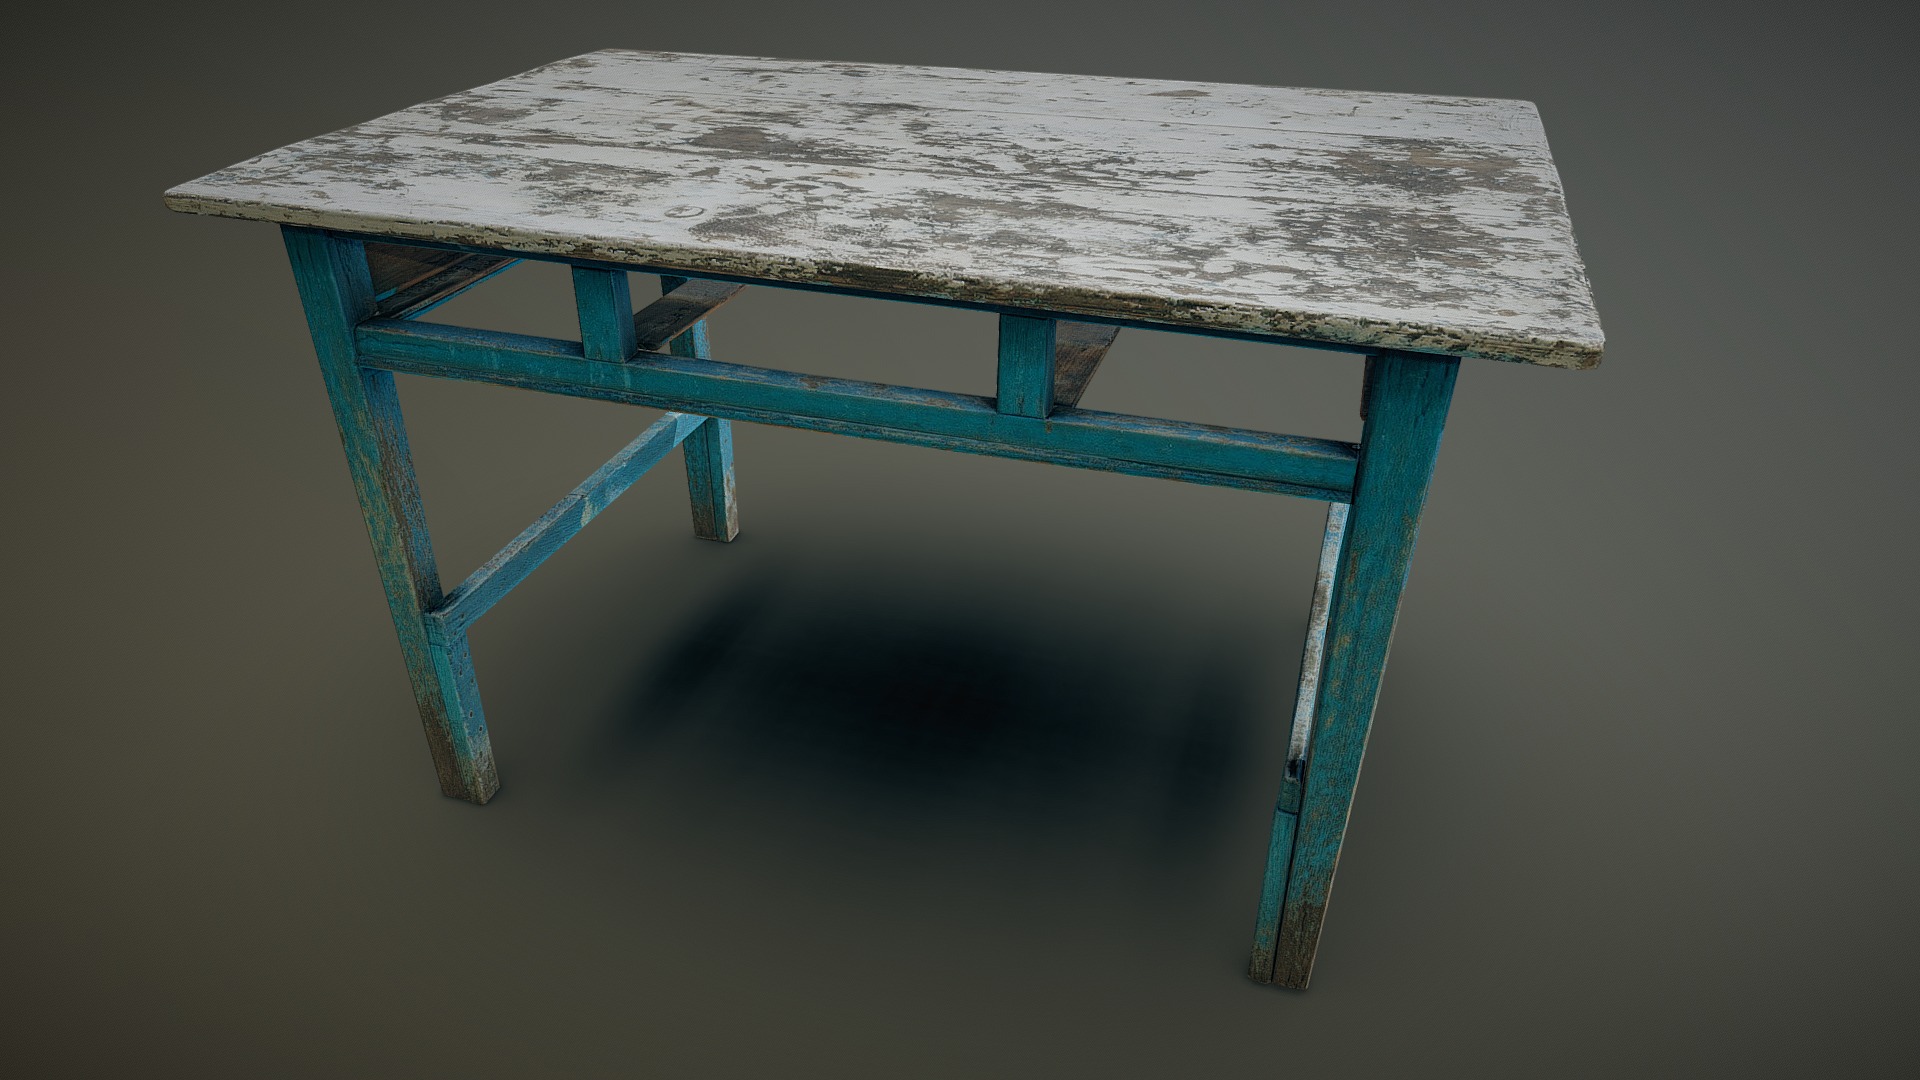 3D model Old Table 01 - This is a 3D model of the Old Table 01. The 3D model is about a wooden table with a blue top.